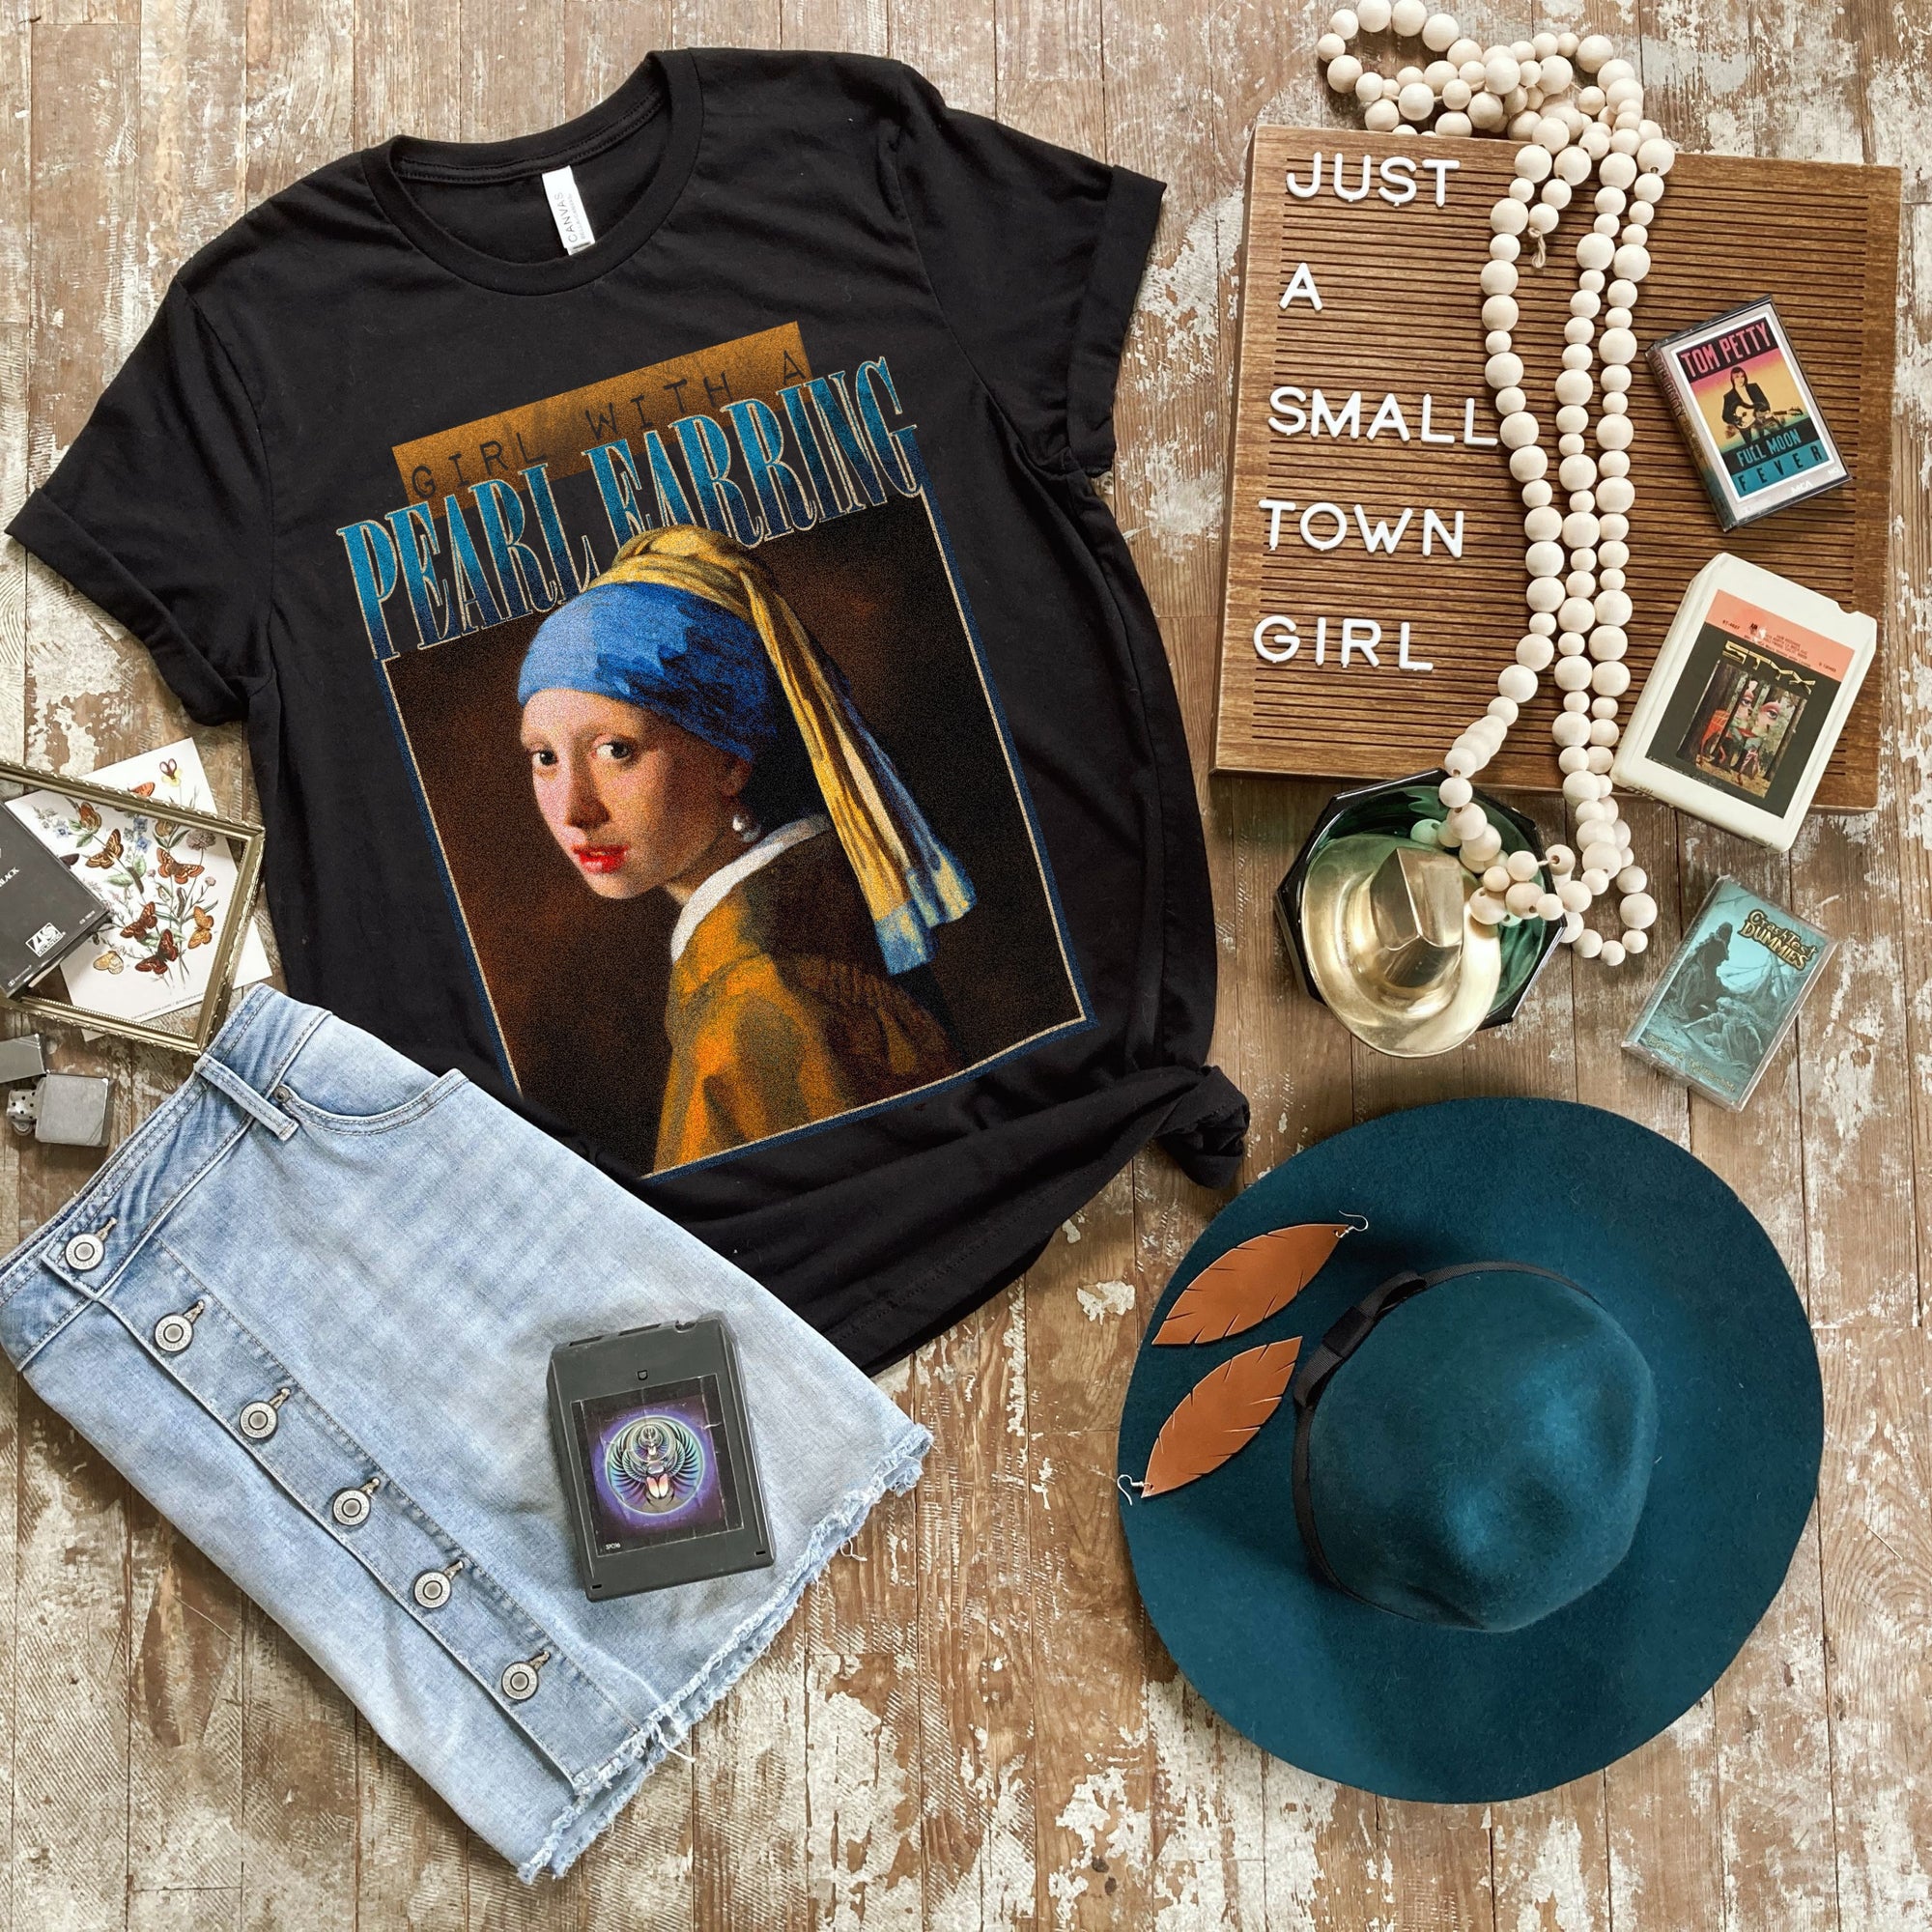 Girl With a Pearl Earring Band Tee